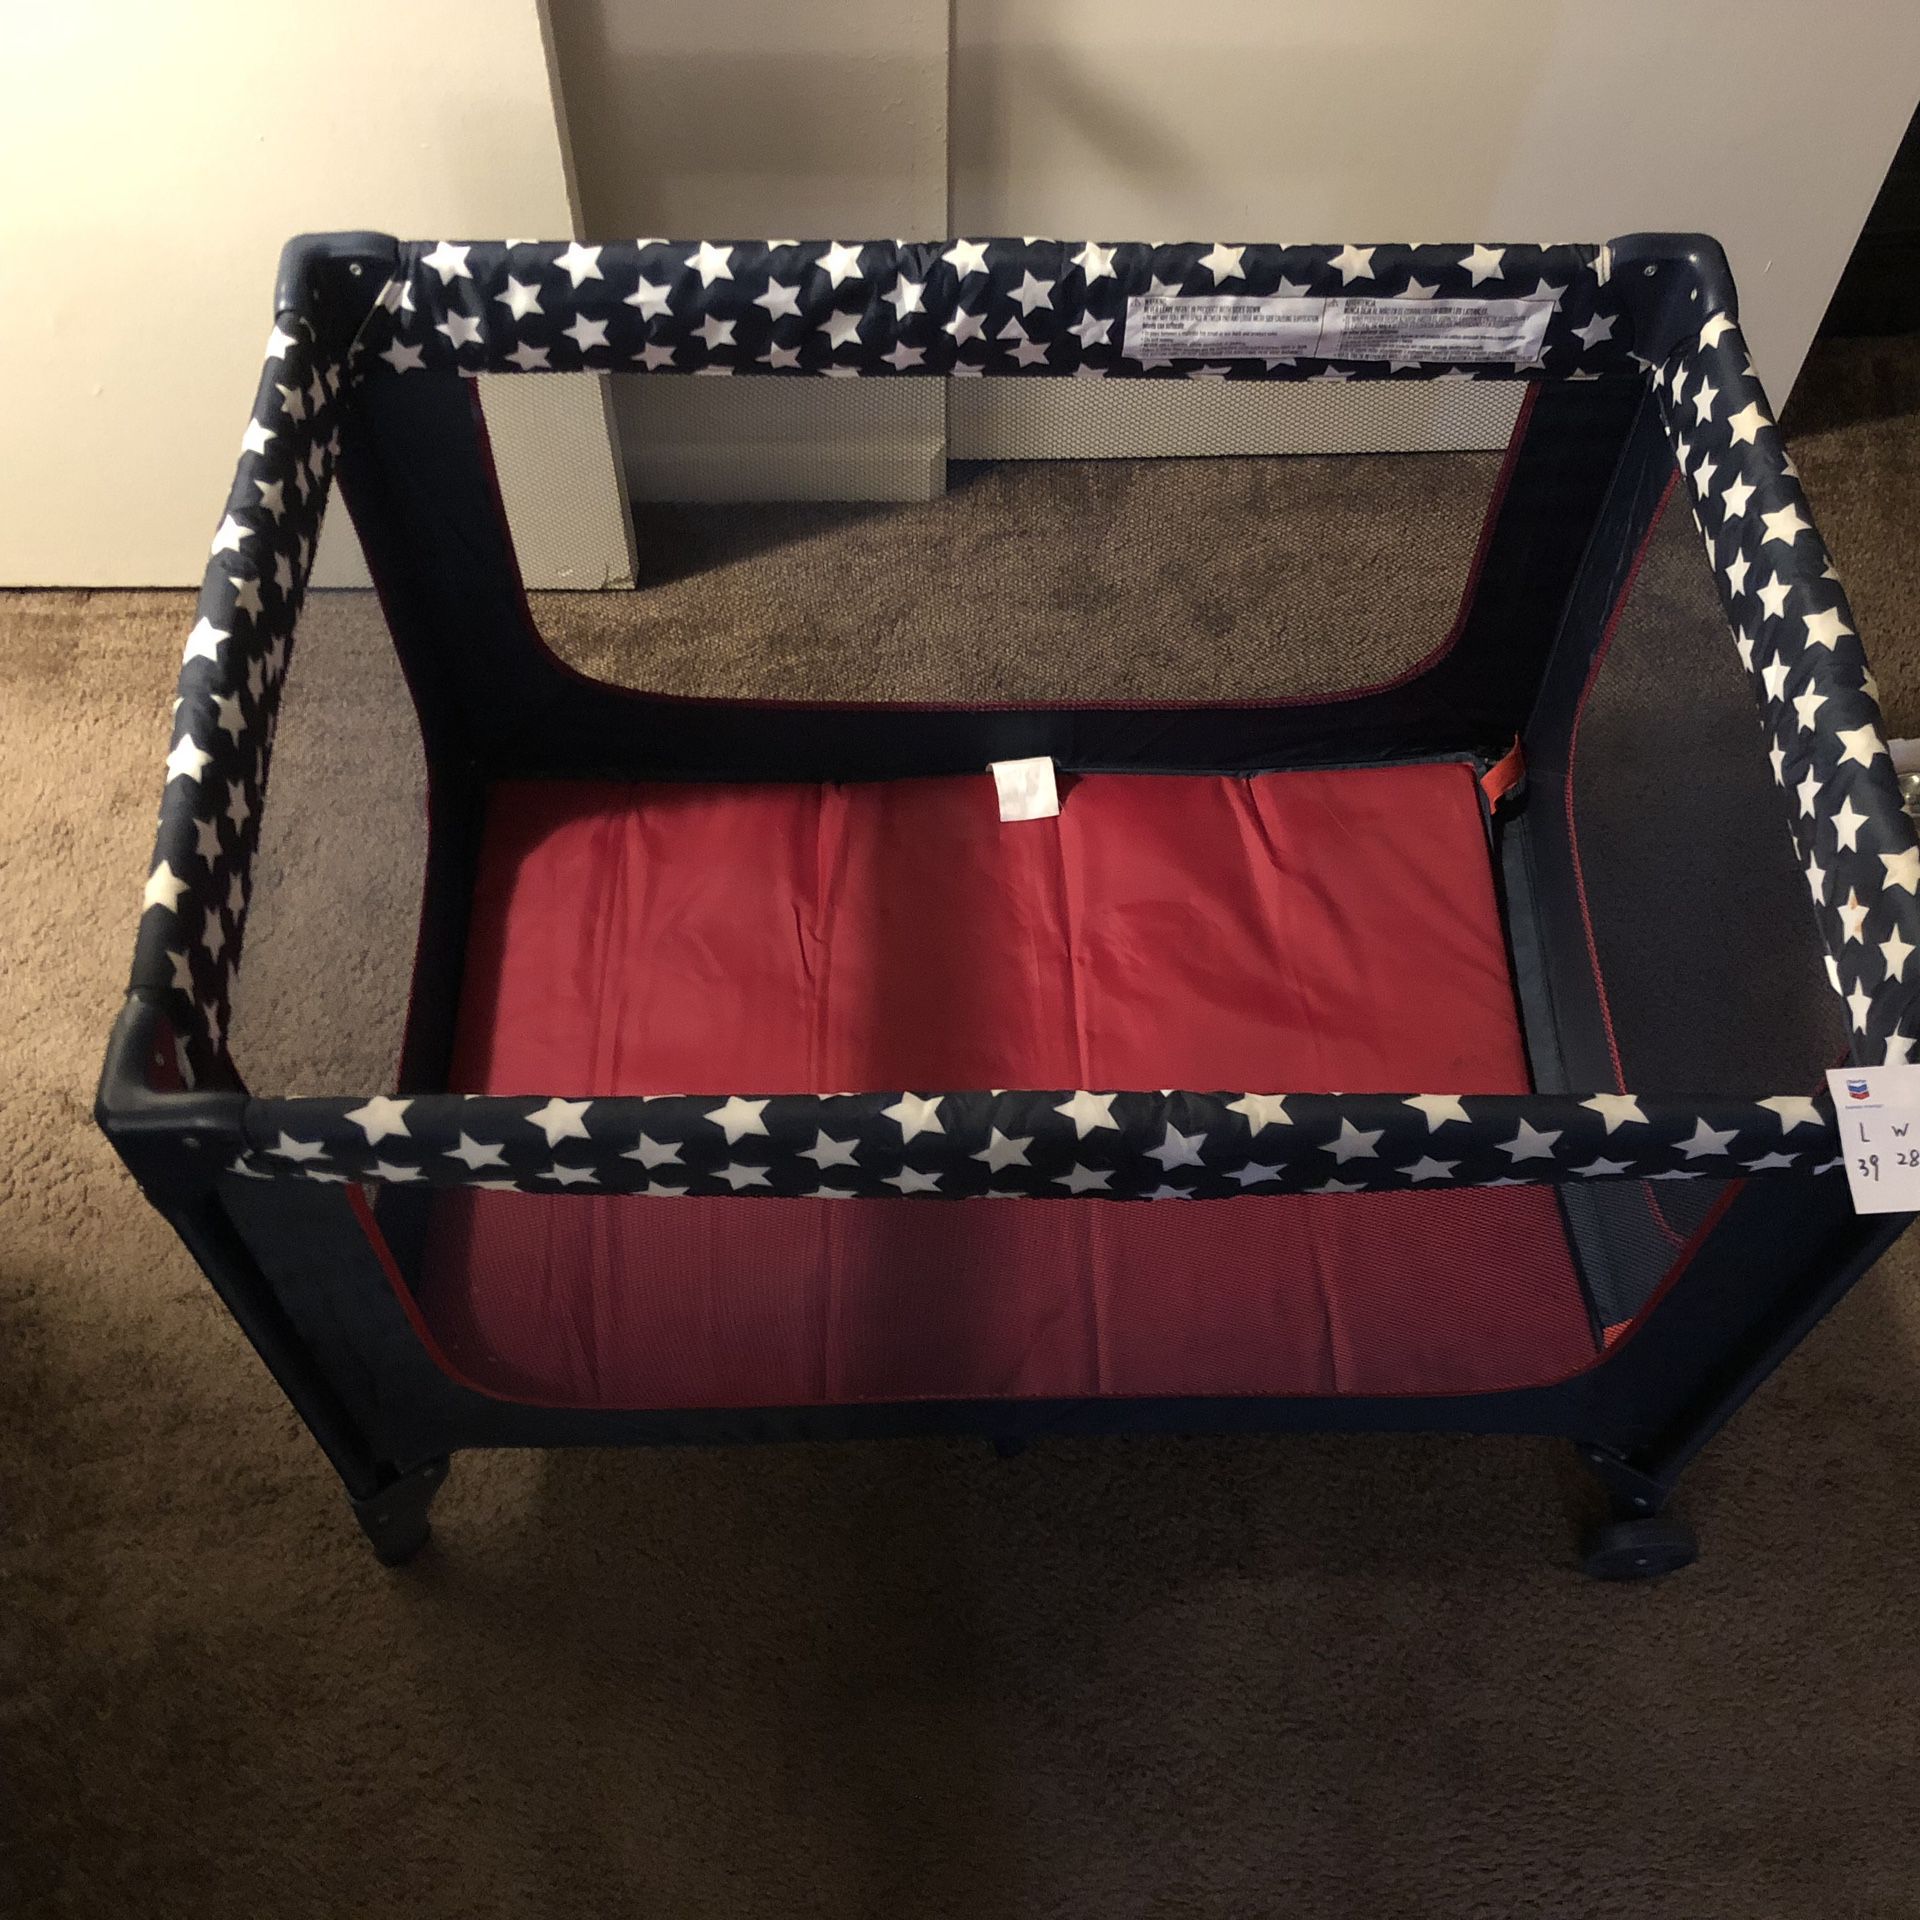 Baby Bed Or Pet Bed(collapsible)